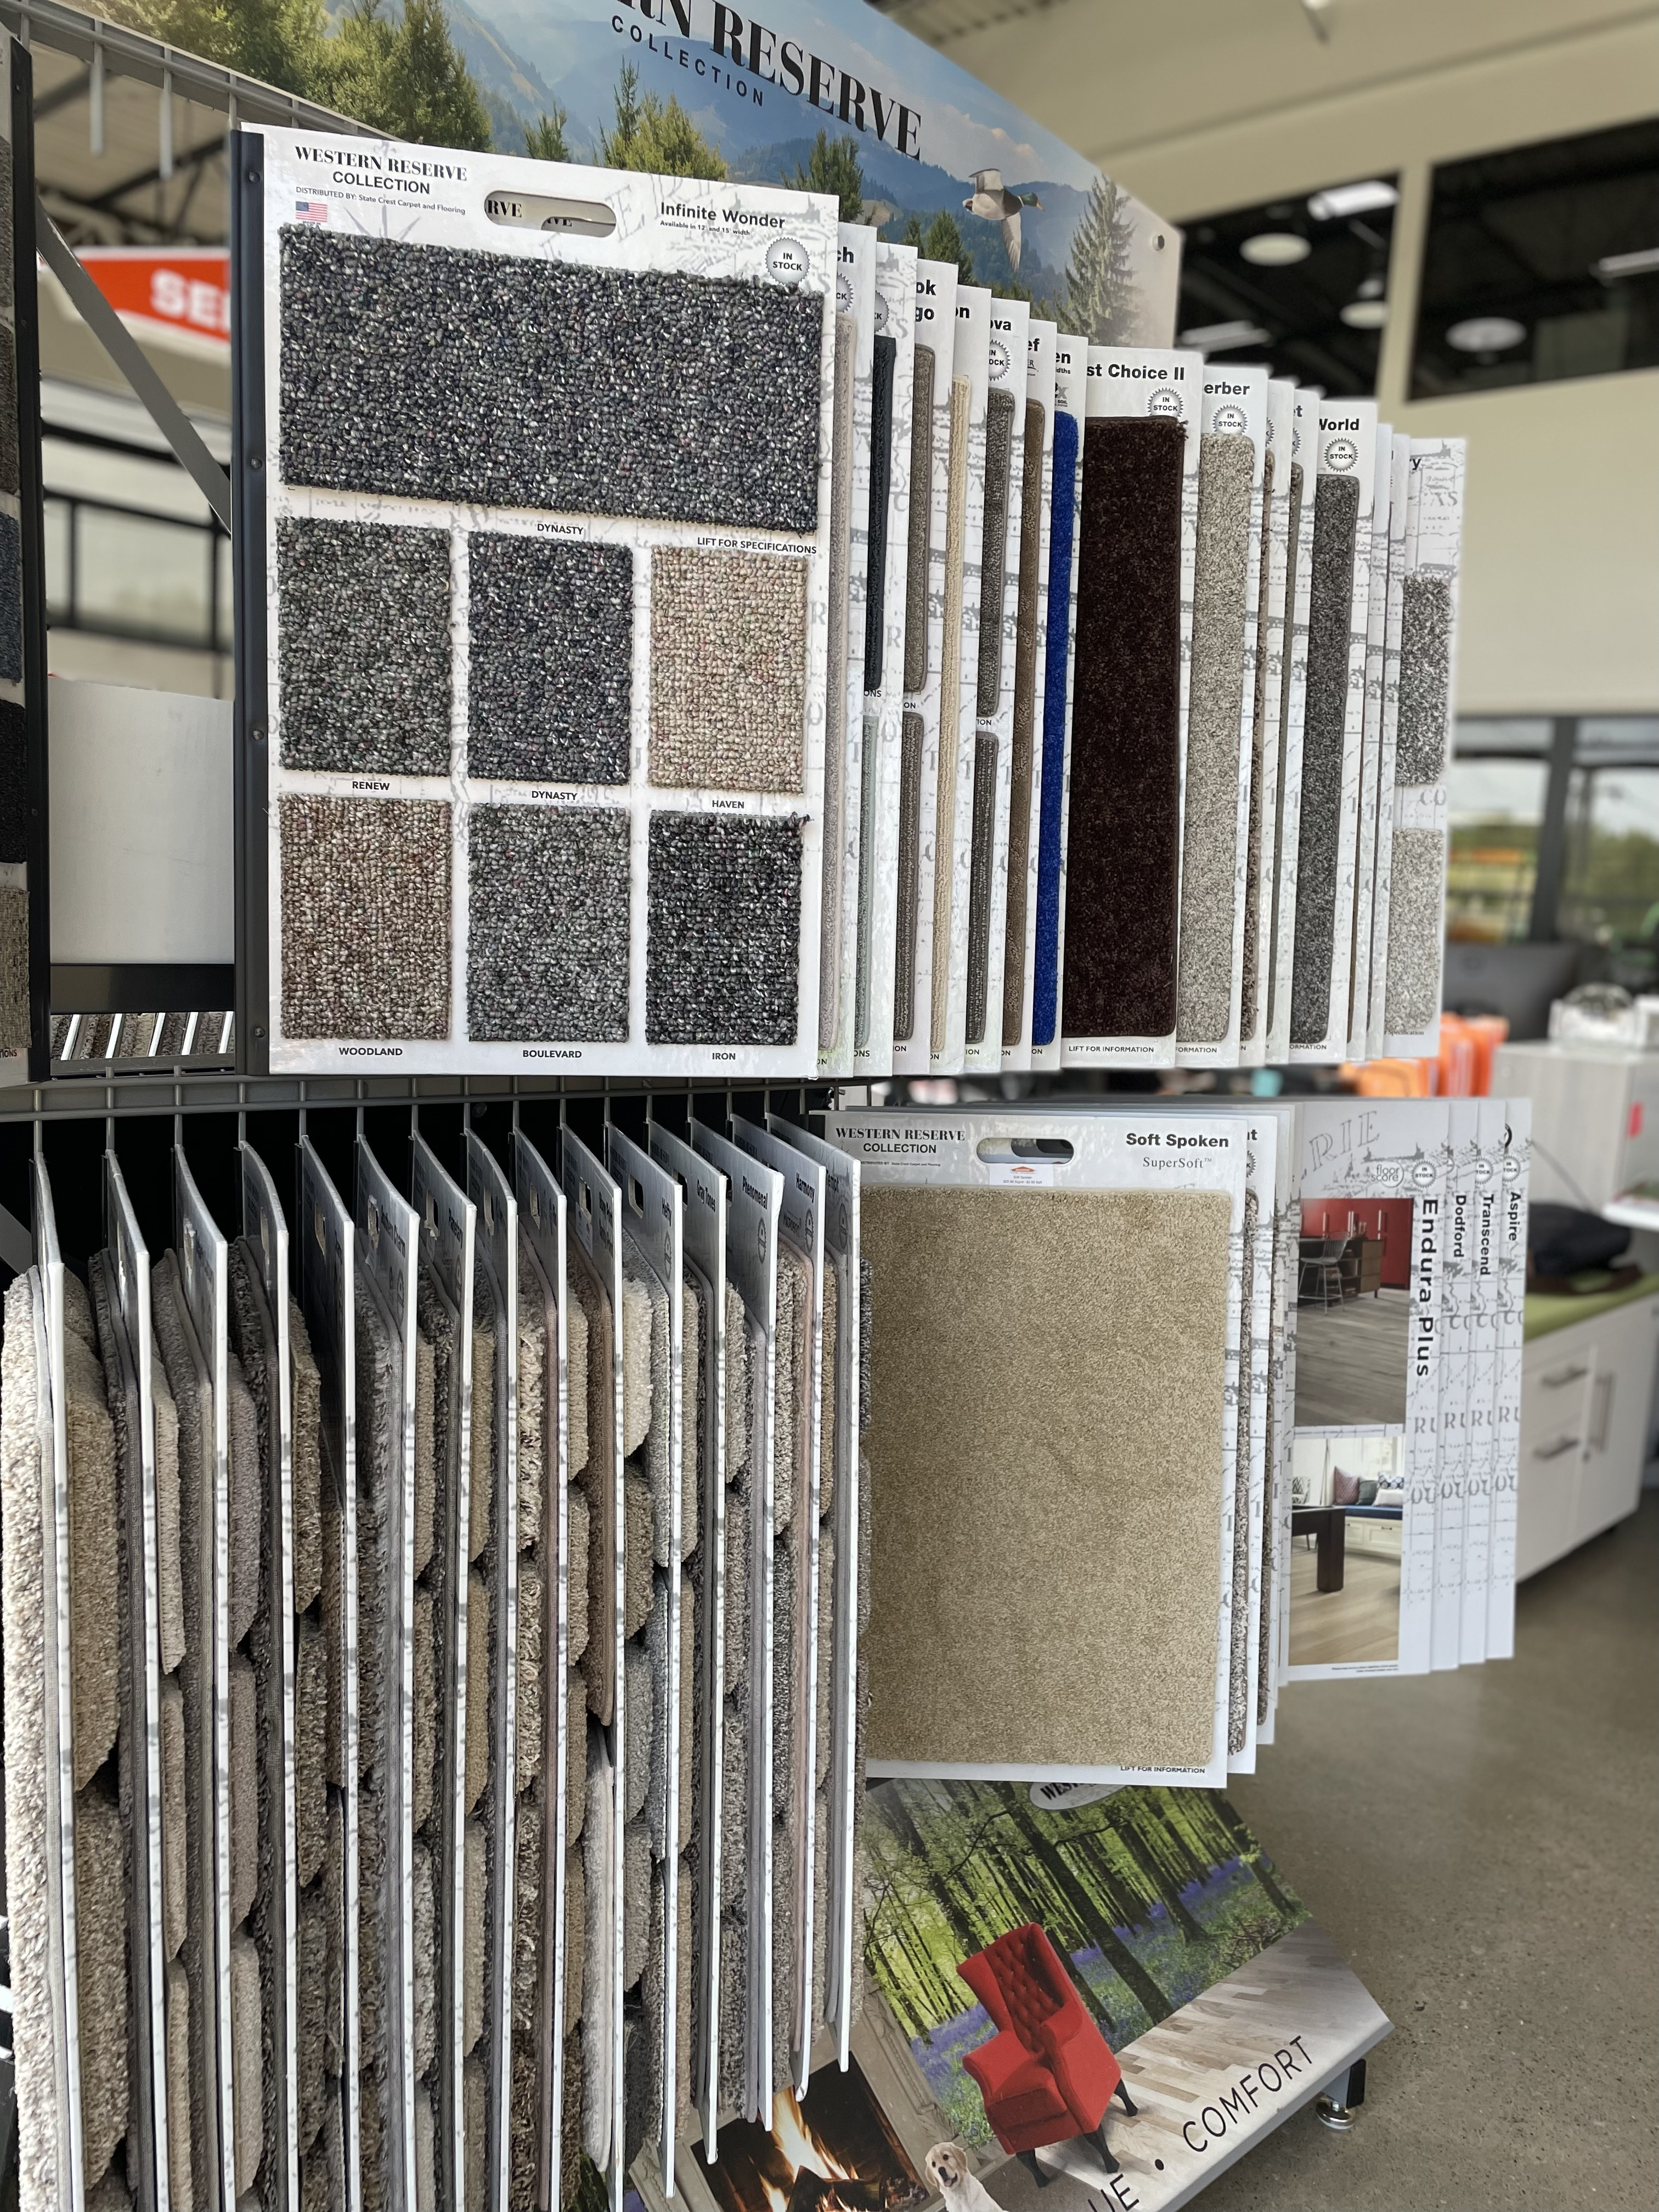 servpro team carpet and flooring samples for building and floor reconstruction